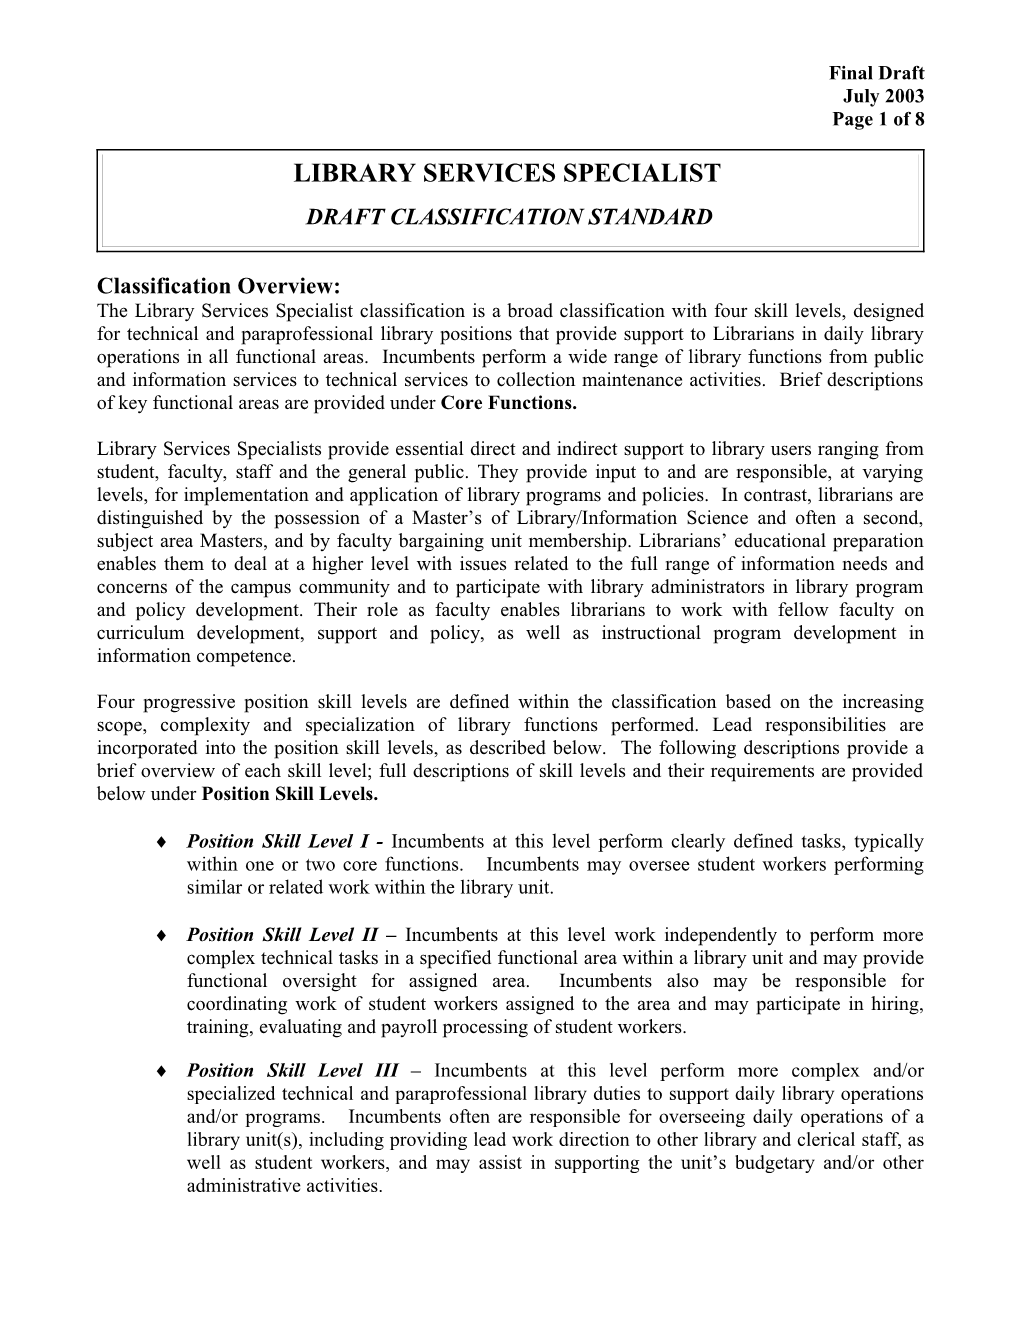 Library Services Specialist Classification